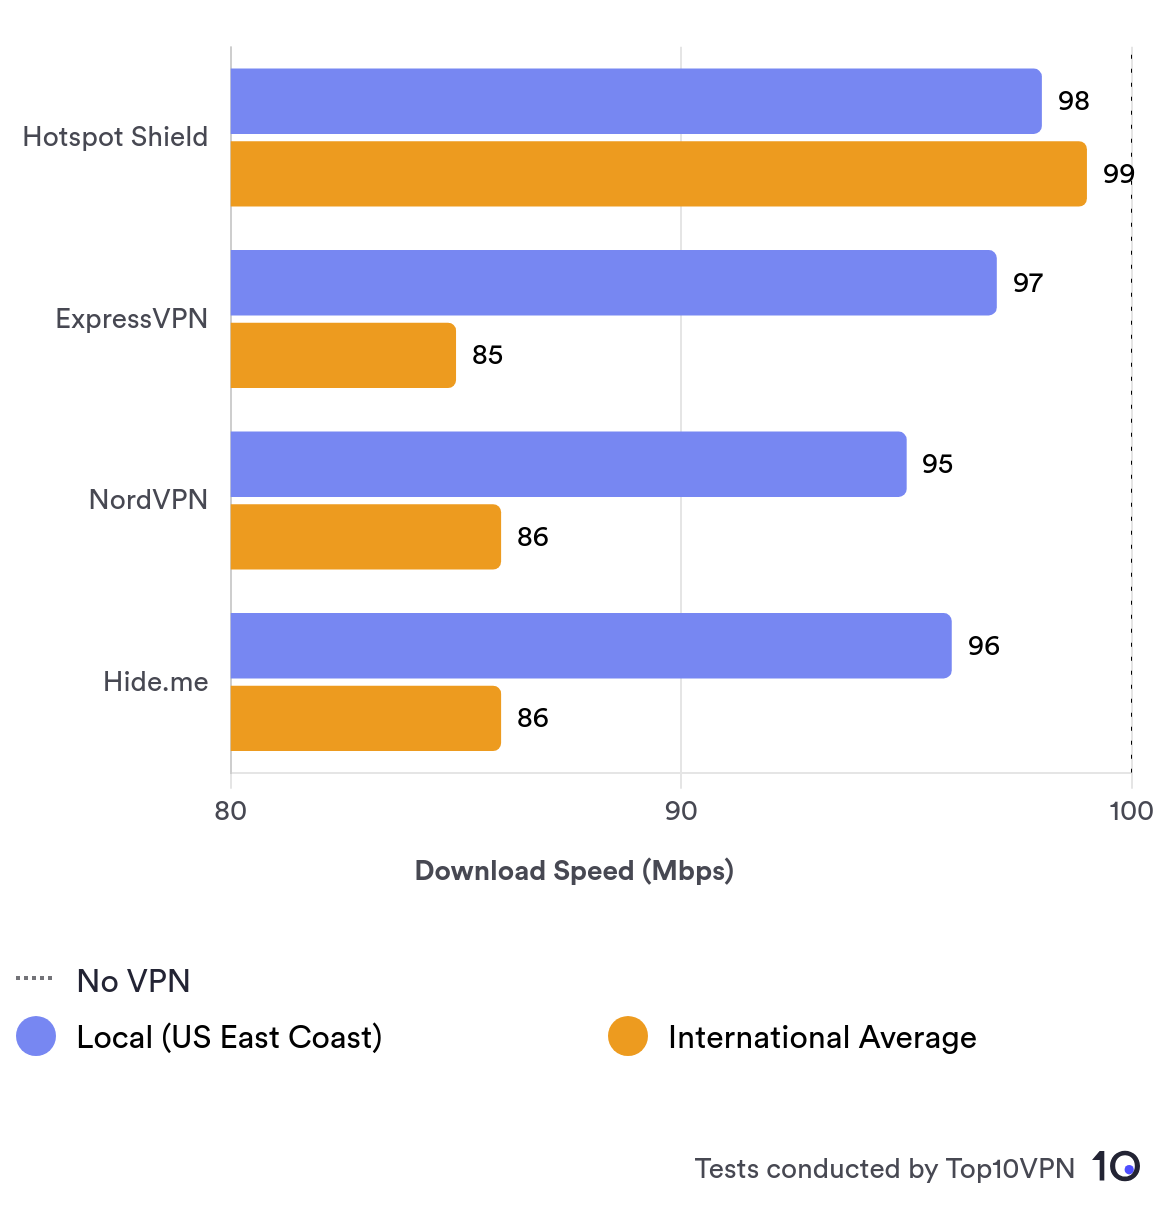 Bar Chart Comparing Hotspot Shield's Local and Long-Distance Speeds With Other Top VPNs.